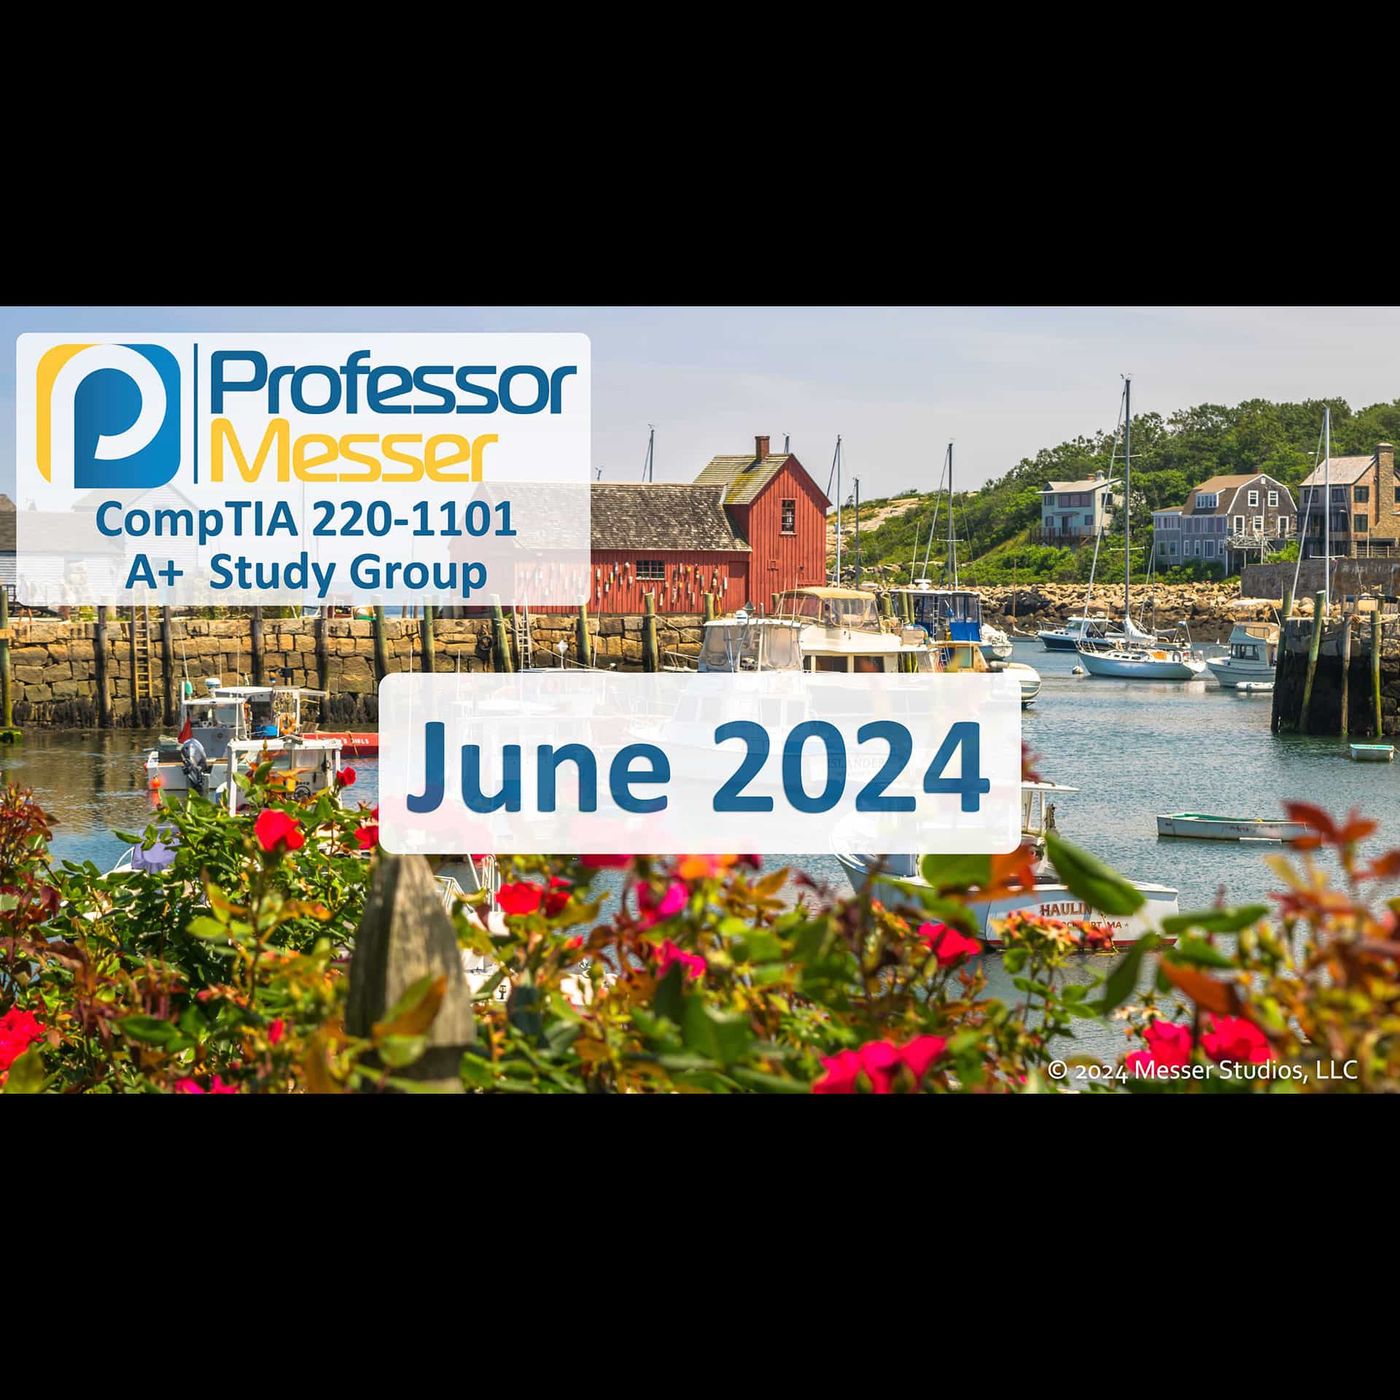 Professor Messer's CompTIA 220-1101 A+ Study Group After Show - June 2024